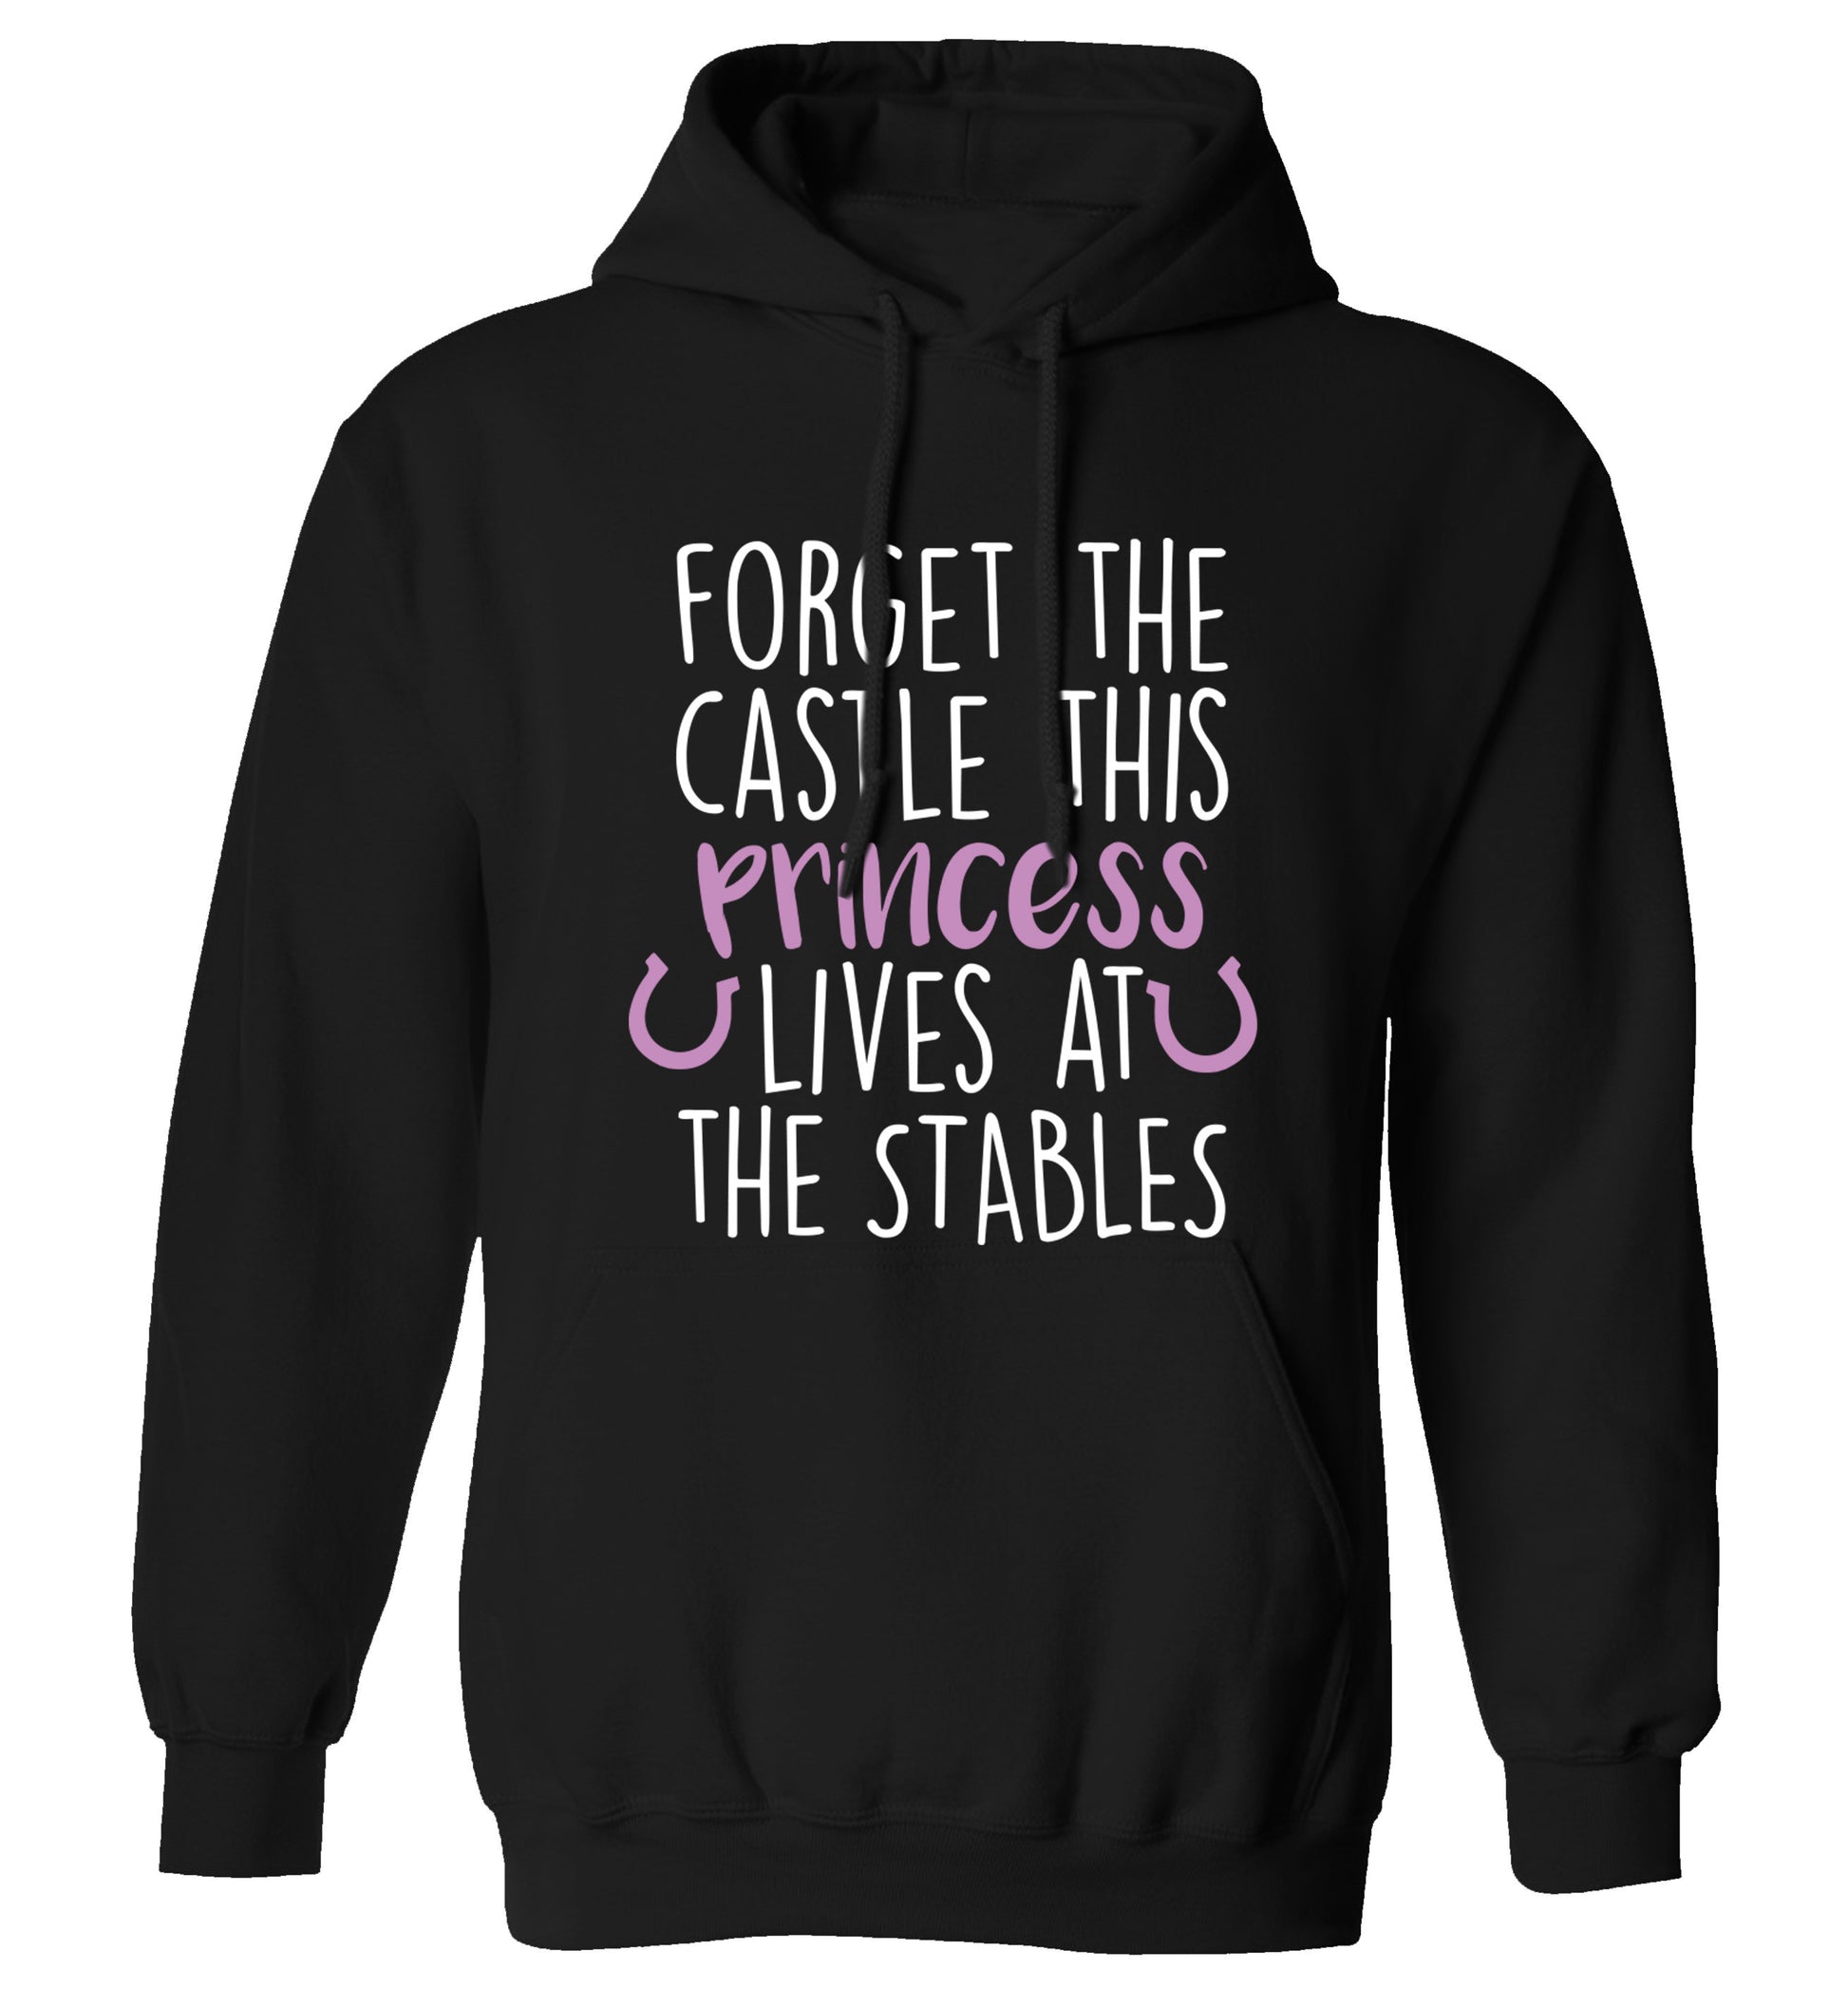 Forget the castle this princess lives at the stables adults unisex black hoodie 2XL